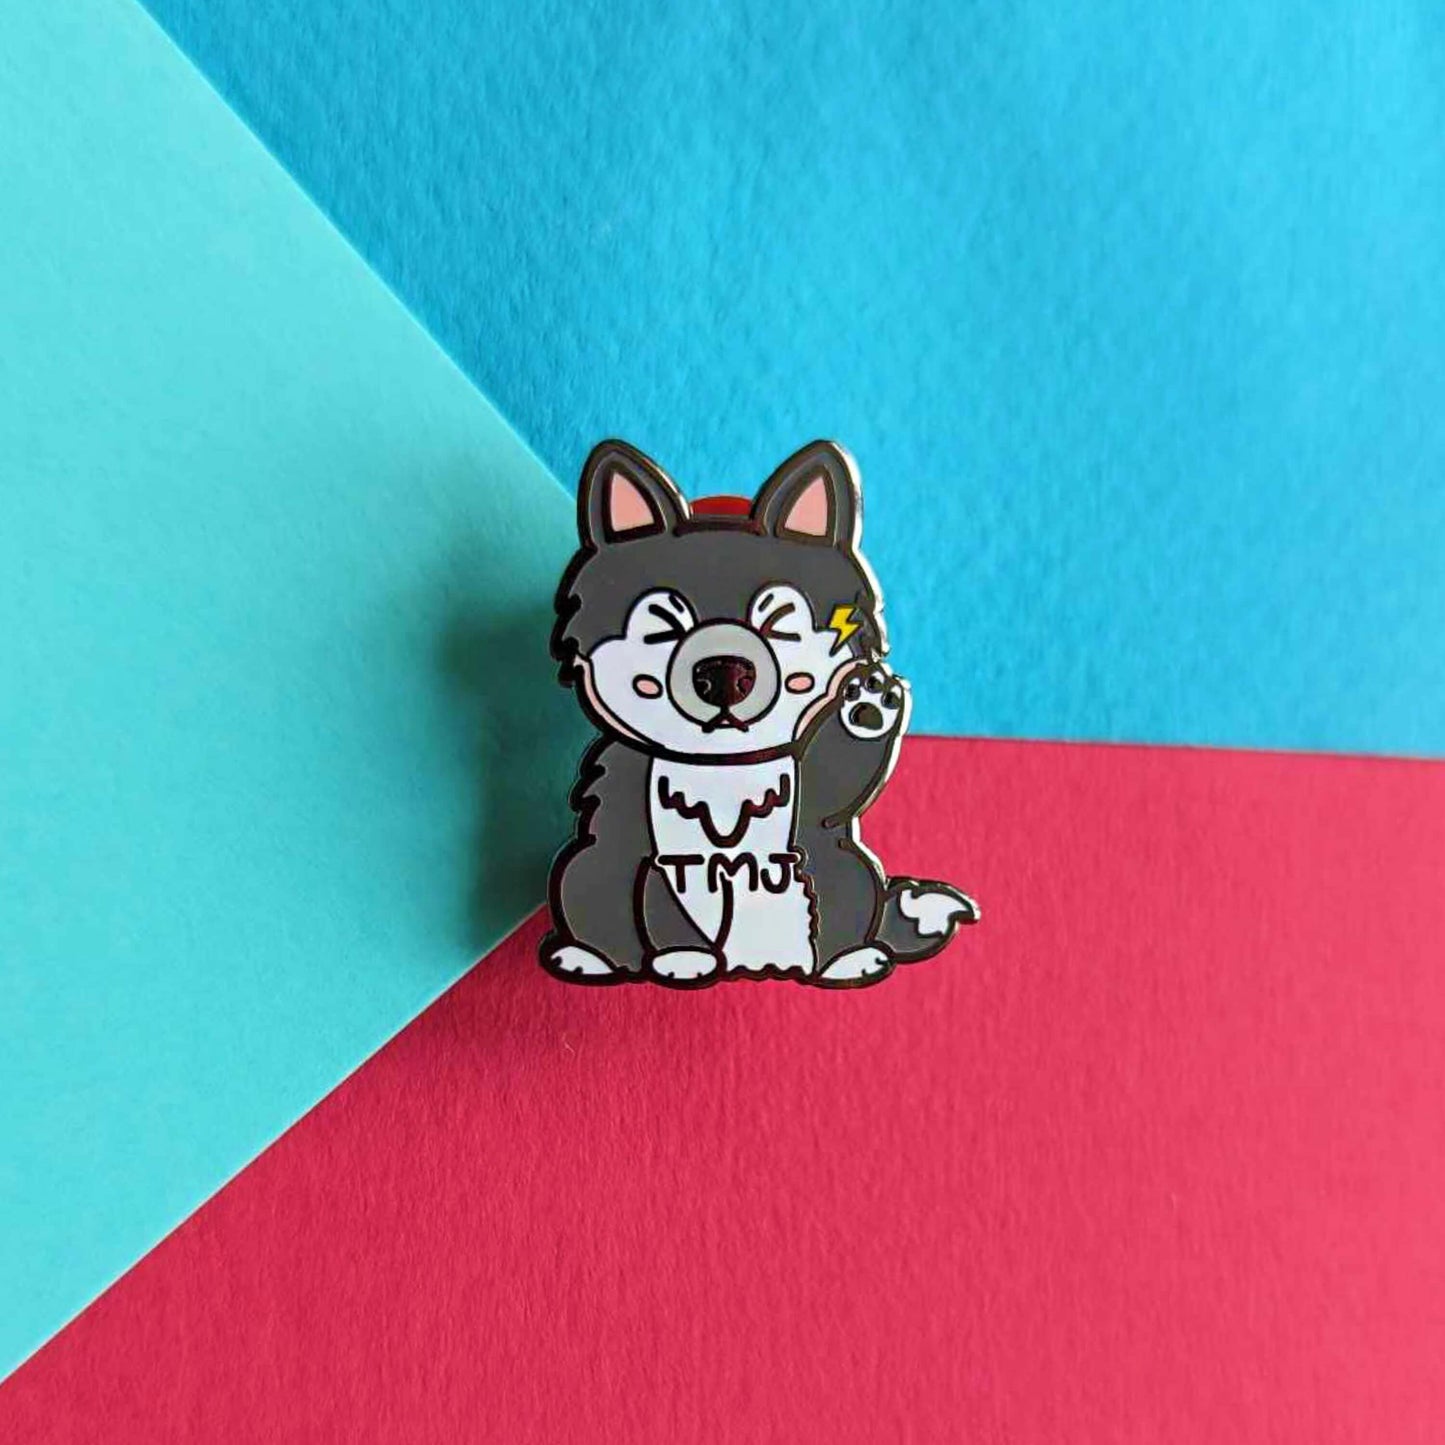  The Tempawromandibular Disorder Dog Enamel Pin - Temporomandibular Disorder TMJ on a blue and red background. The grey husky dog shaped enamel pin has a pained face with shut eyes, one paw up by its jaw with a yellow lightning bolt and black text across its chest reading 'TMJ'. The hand drawn design is raising awareness for Temporomandibular Disorder TMJ.